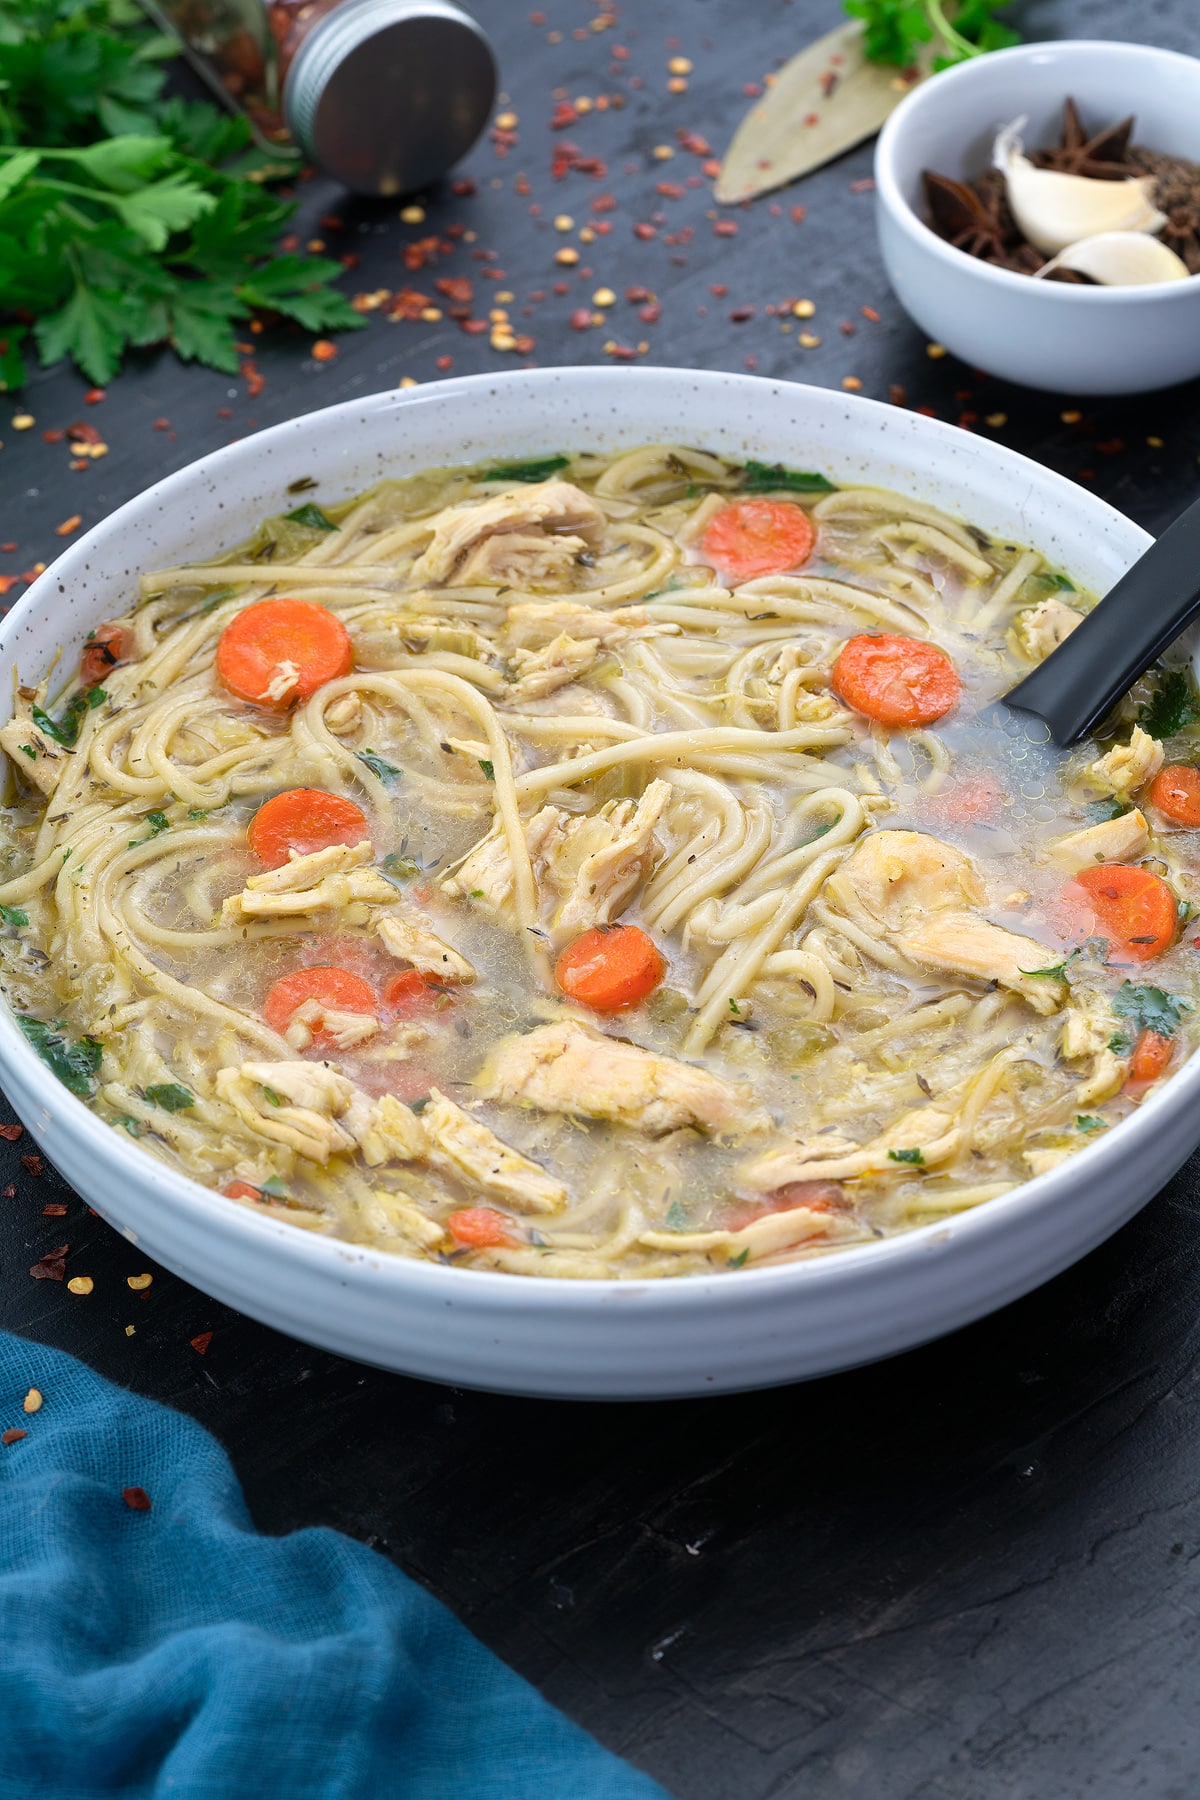 Chicken noodle soup in a white bowl with few ingredients scattered around.